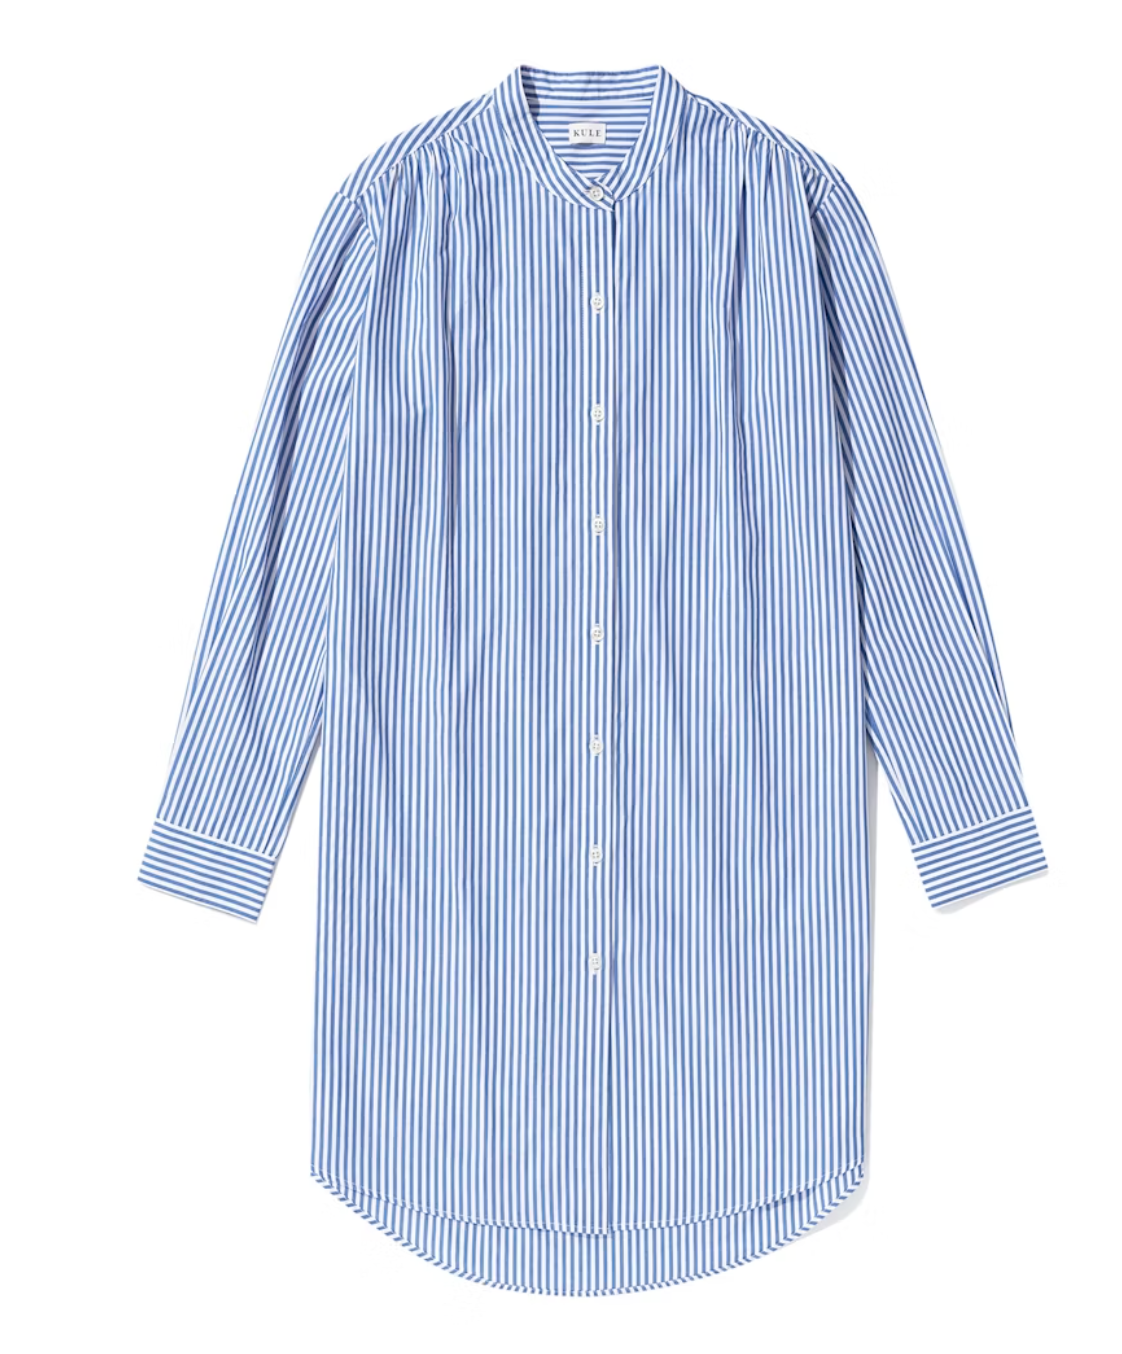 A long-sleeved men&#39;s shirt displaying thin blue vertical stripes, buttoned front, laid flat against a white background in a Scottsdale Arizona bungalow. The Helena Royal Blue/White by Kule.